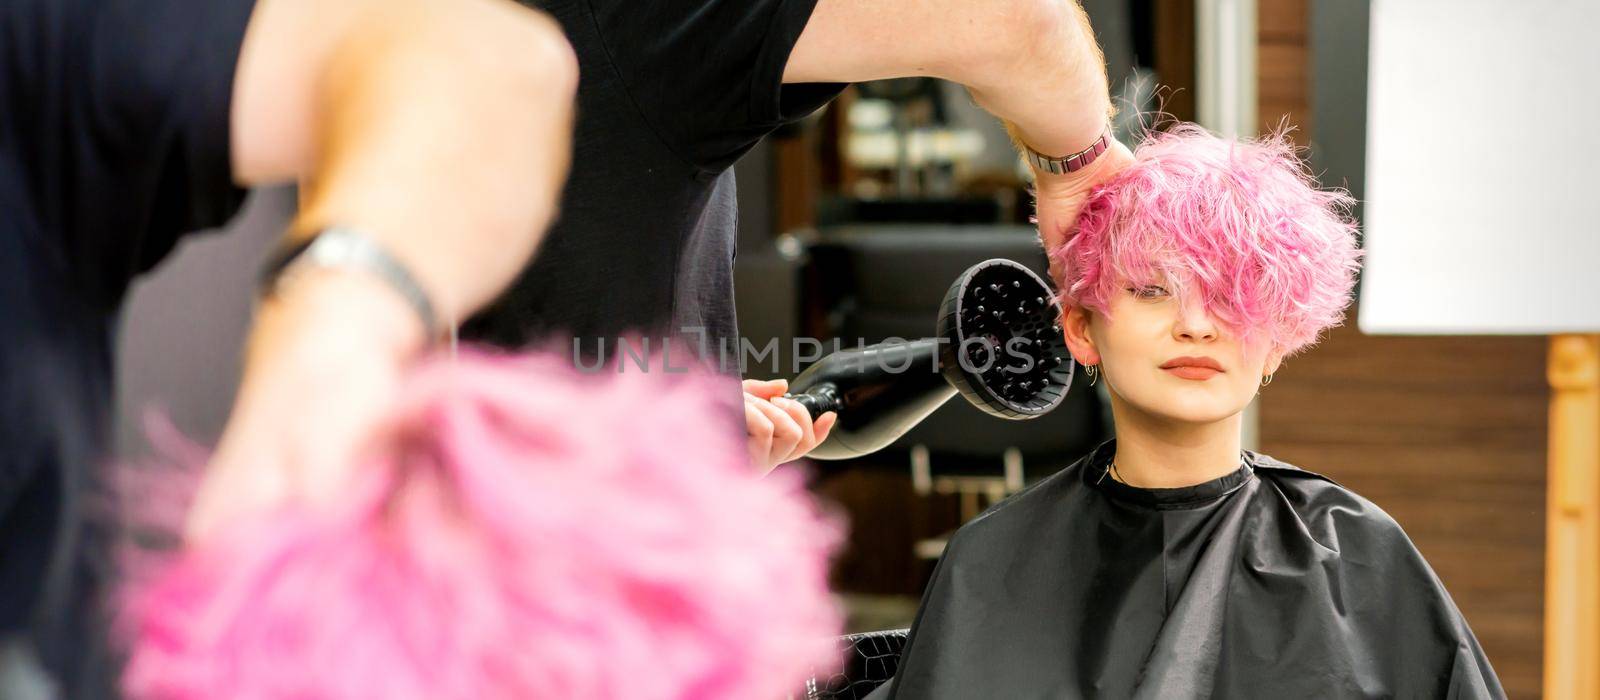 A male hairdresser professional drying stylish pink hair of the female client with a blow dryer in a beauty salon